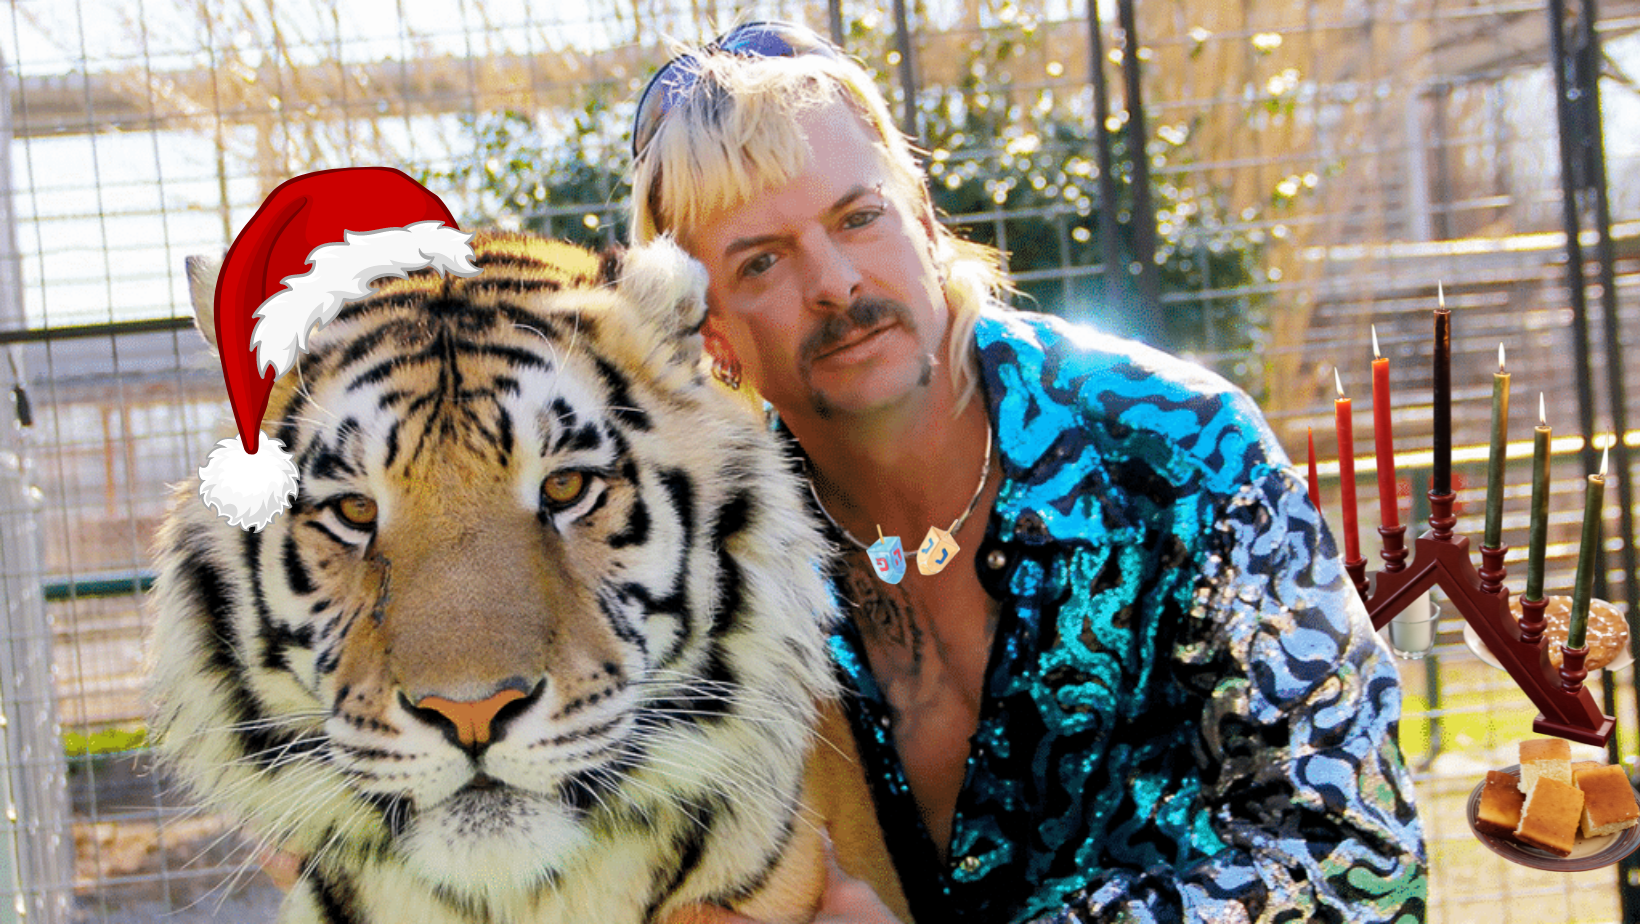 How to Navigate the Holiday Season With New “Tiger King” Episodes